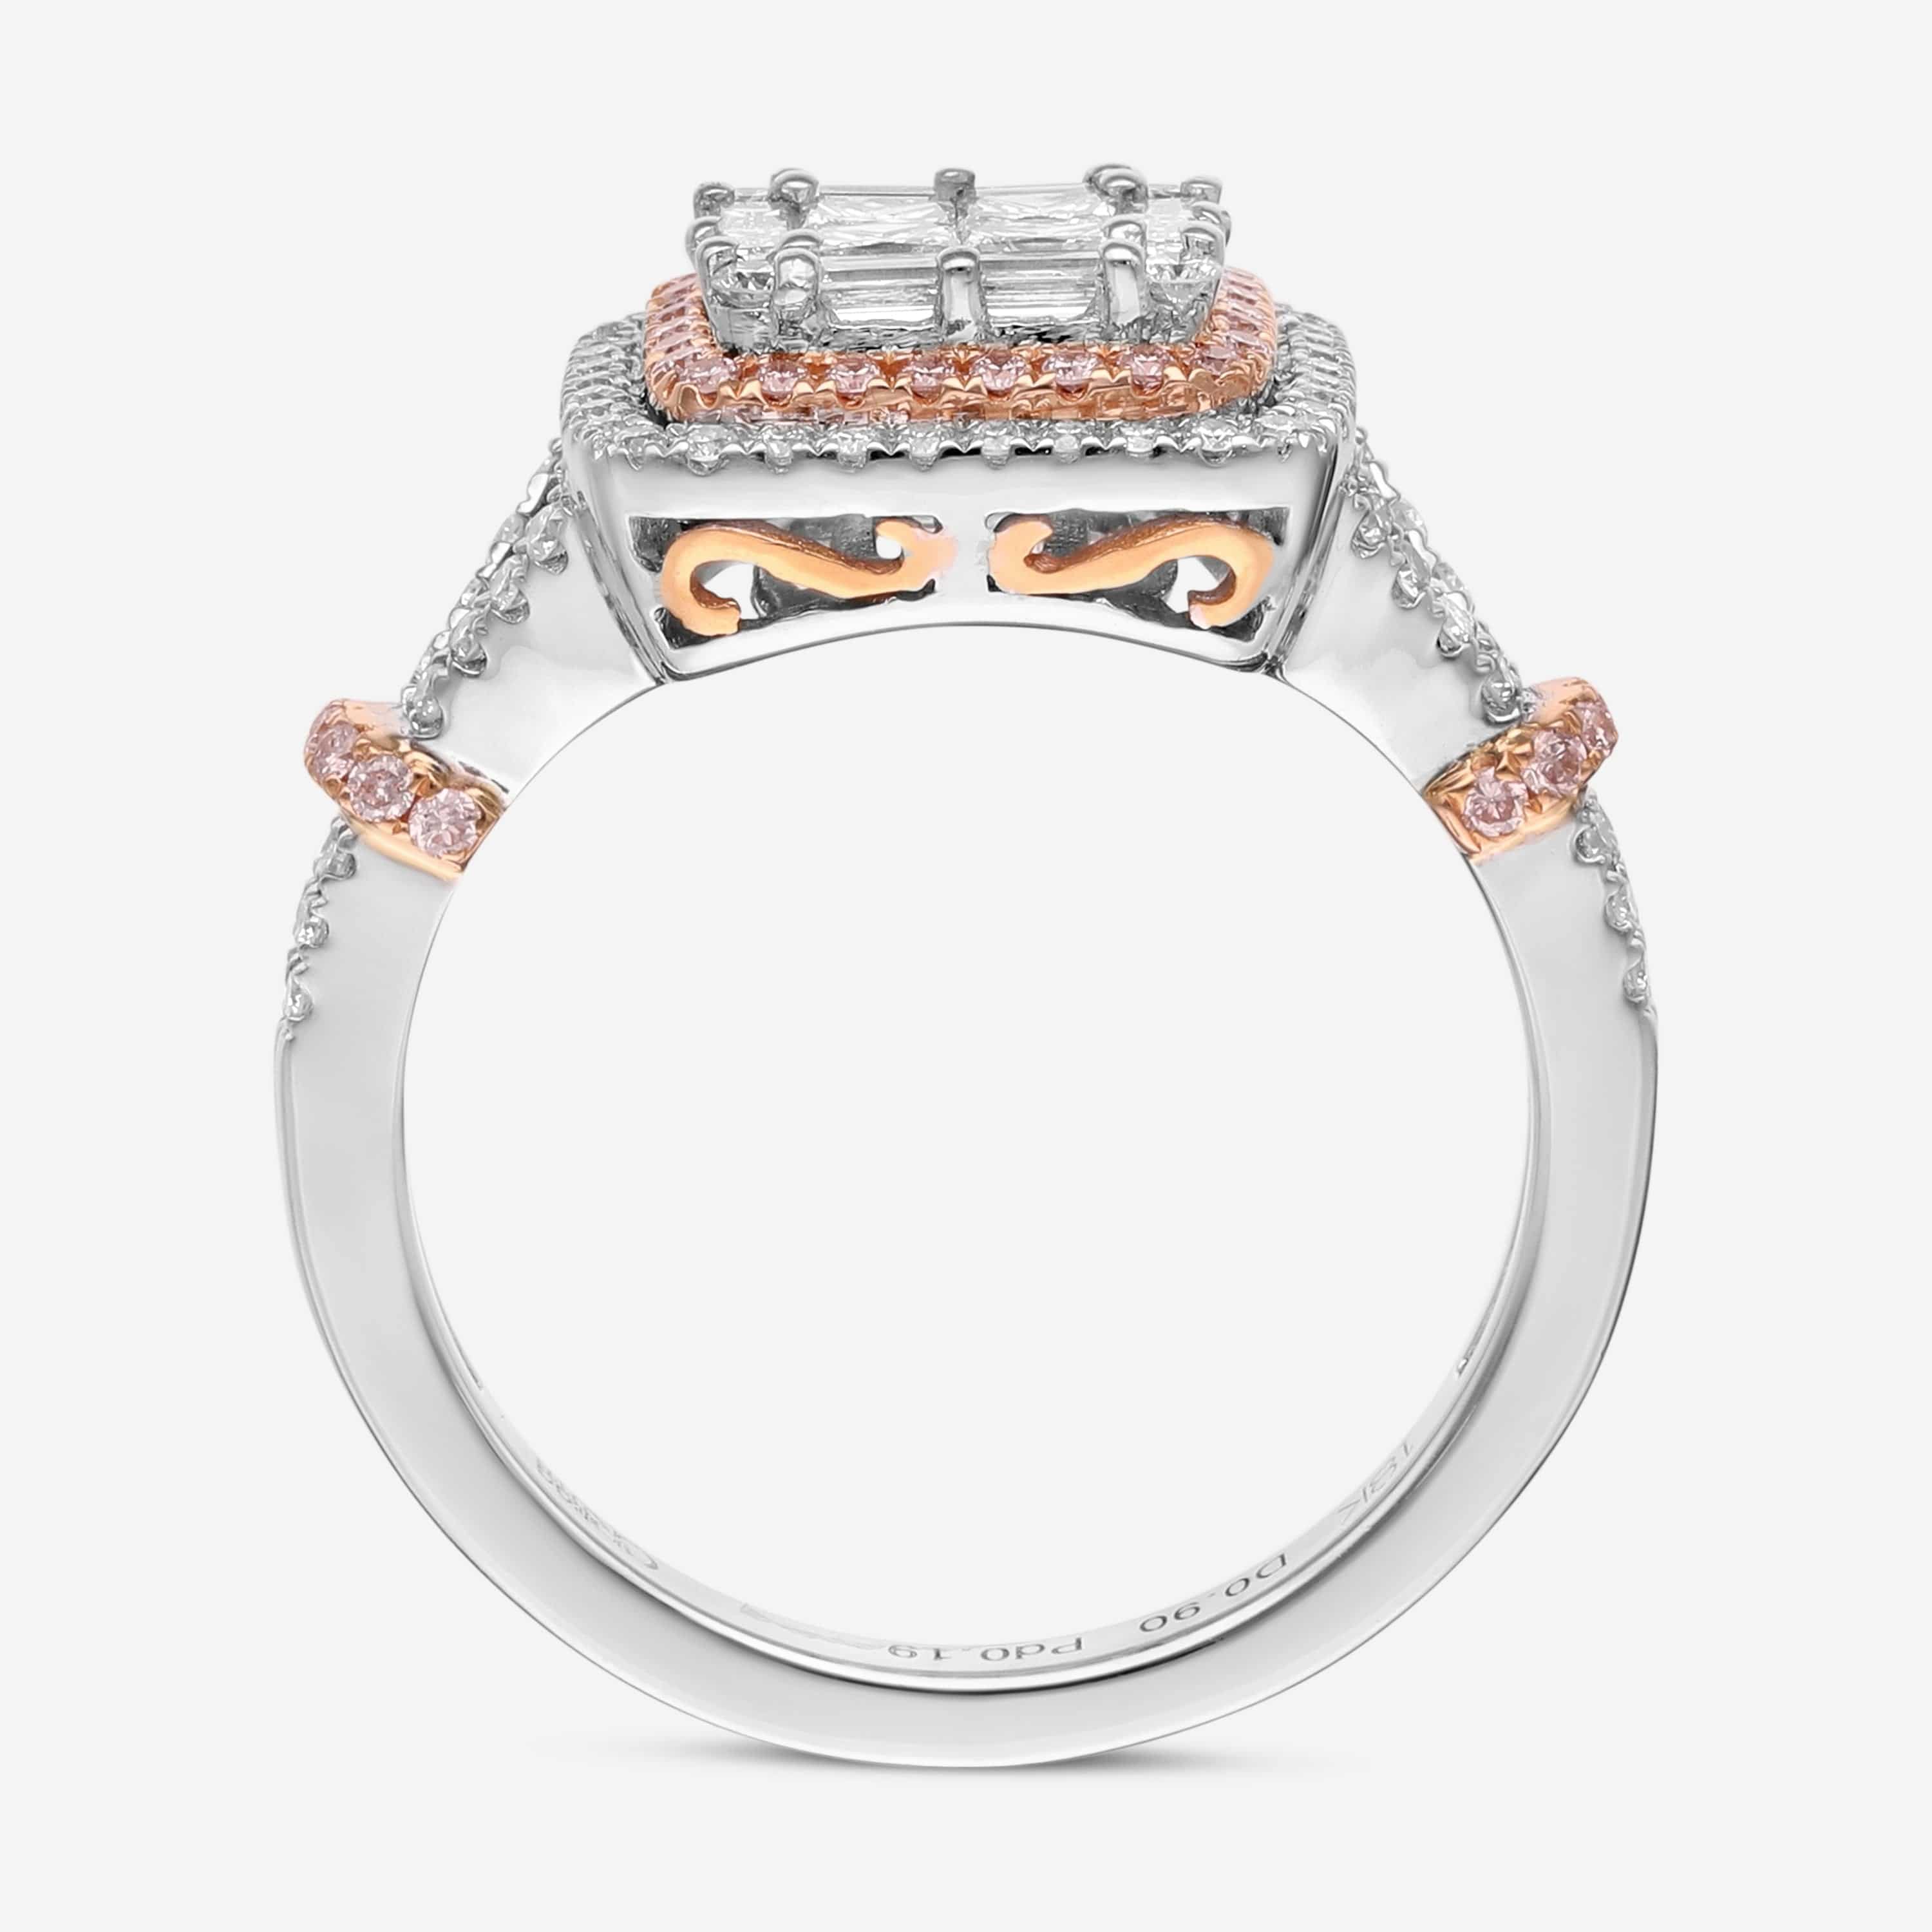 Gregg Ruth 18K Gold, White Diamond 0.88ct. tw. and Pink Diamond Engagement Ring Sz. 6.5 50097 - THE SOLIST